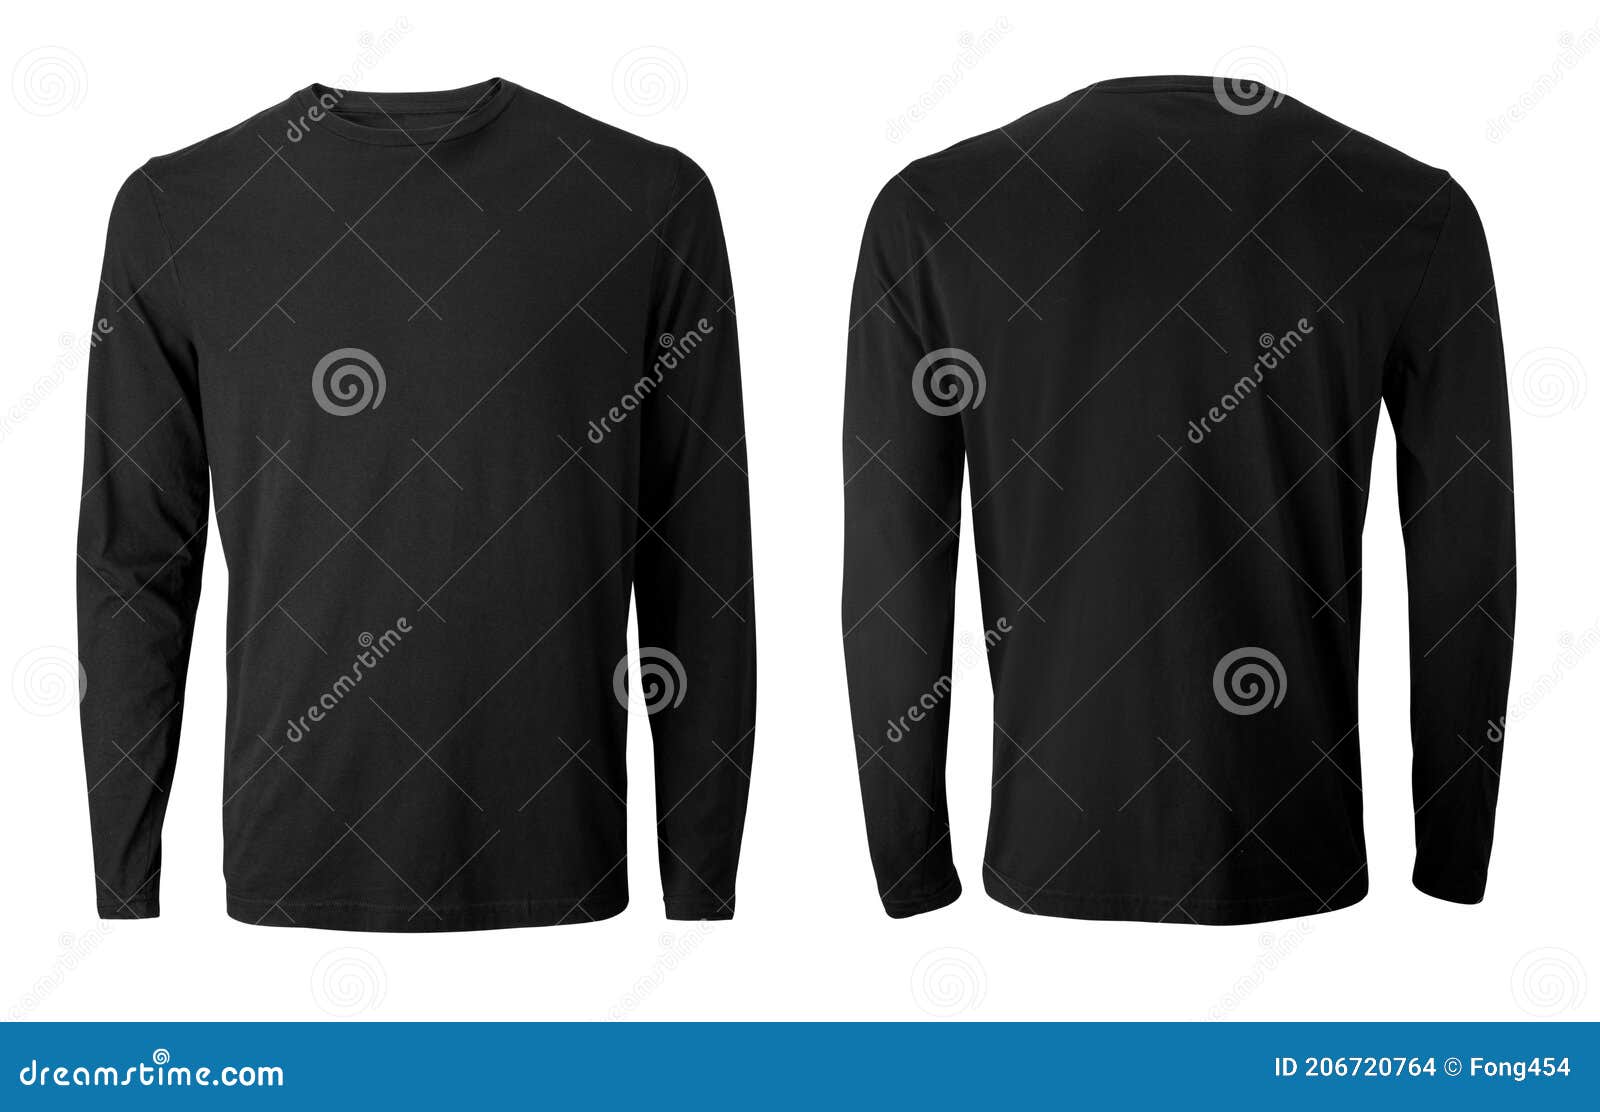 long sleeve black t-shirt with front and back views  on white